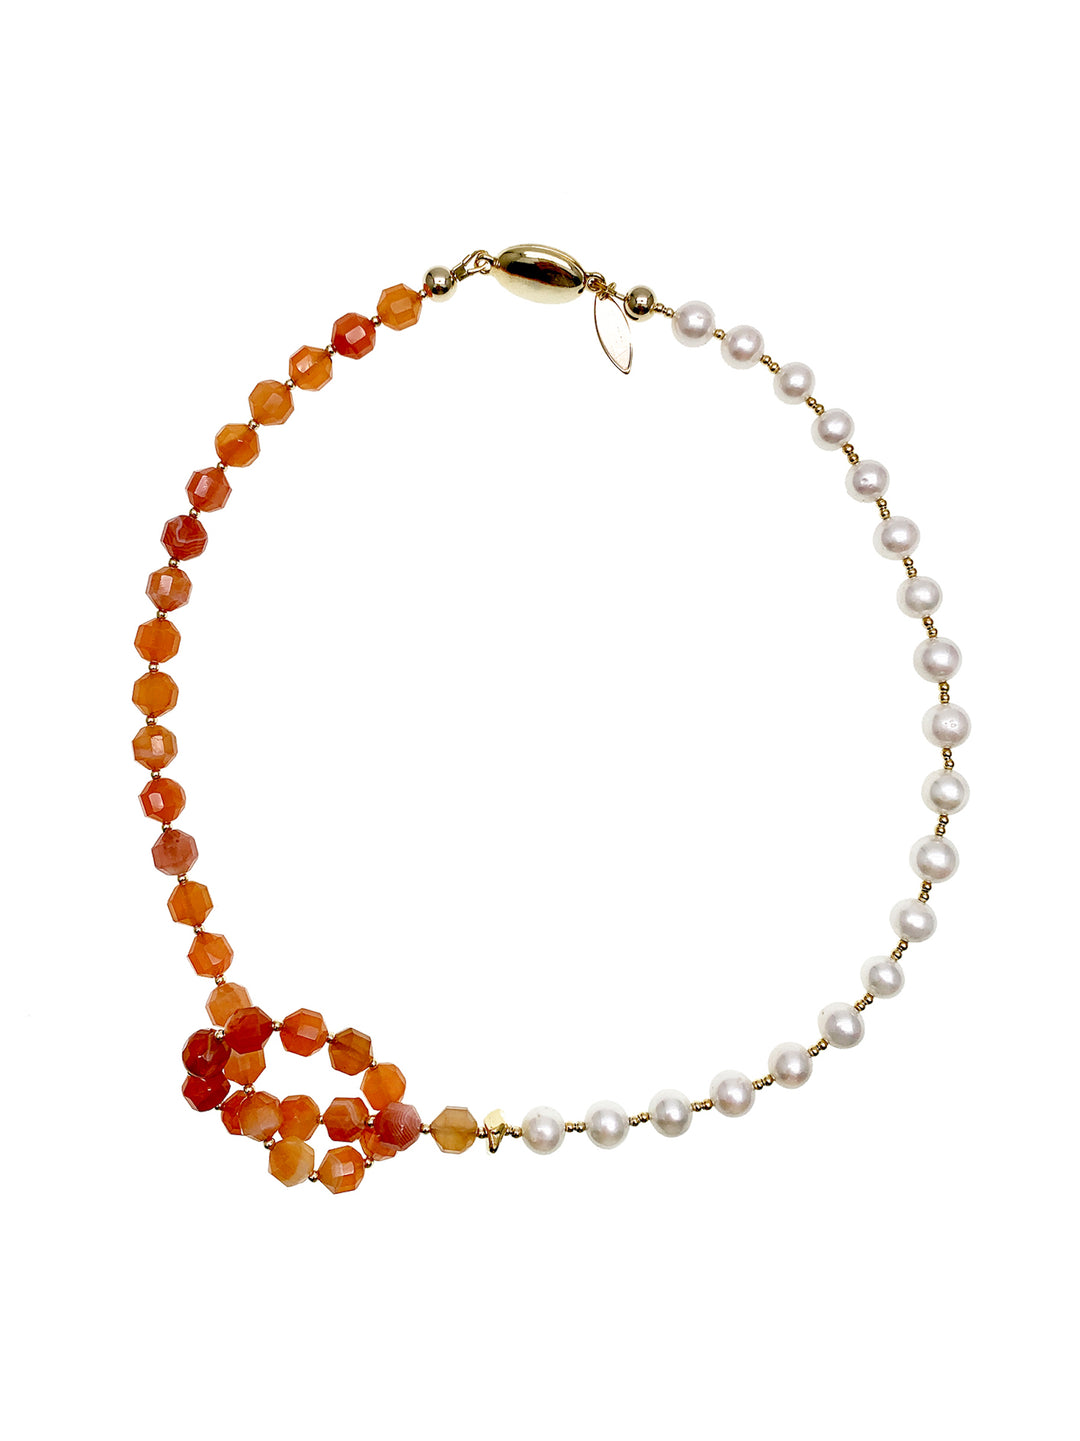 Knotted Orange Agate With Freshwater Pearl Necklace GN003 - FARRA